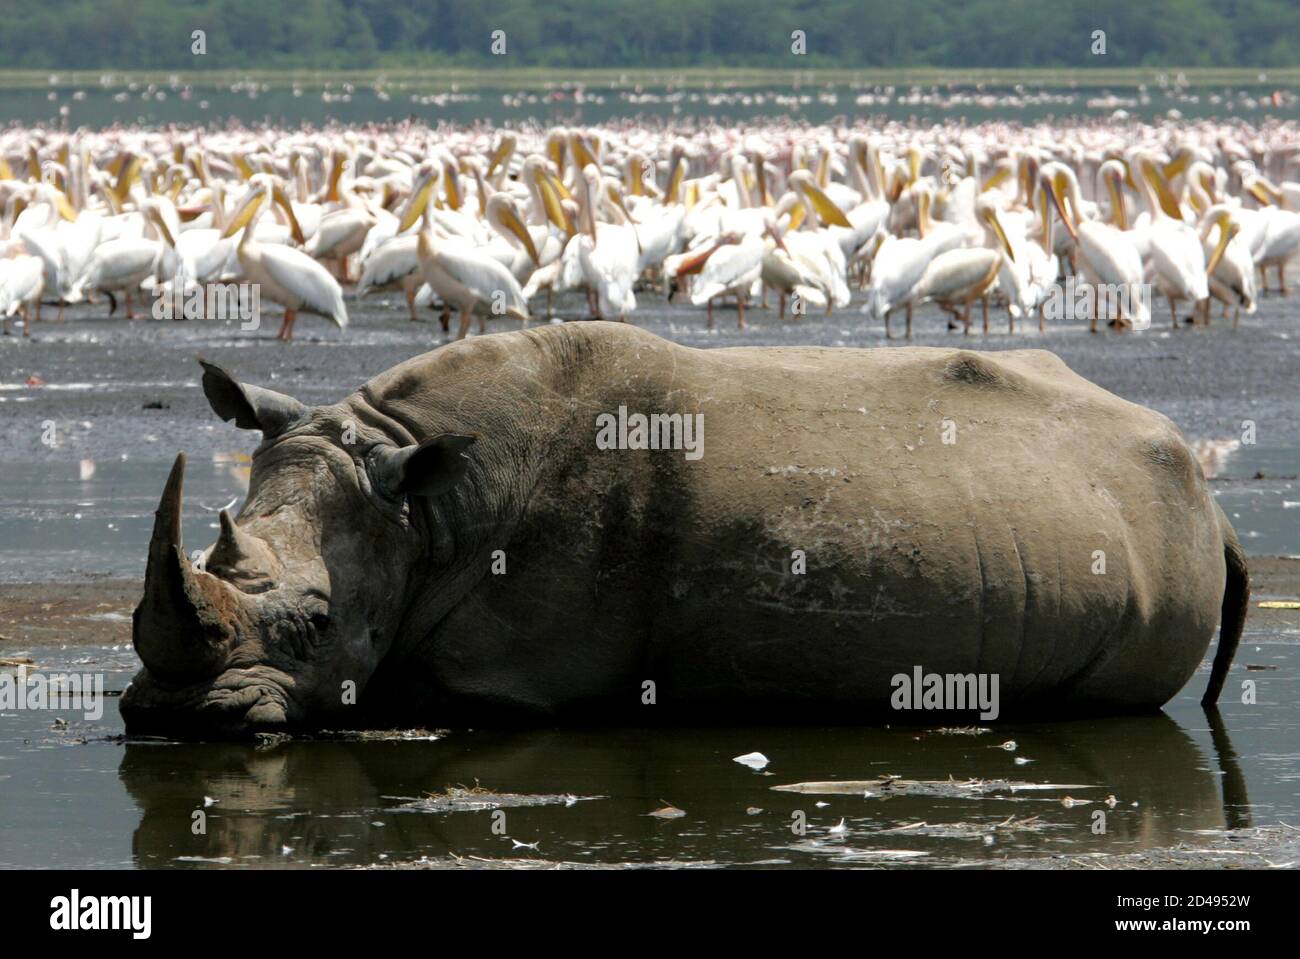 A square-lipped or white rhinocerus cools himself in the water of lake Nakuru, 120 km (74 miles) west of capital Nairobi, January 8, 2005. A new wave of poaching activities in key wildlife habitats in Kenya has killed several Elephants and Rhinos, the country's wildlife agency Kenya Wildlife Services (KWS) said. Even though Kenya has declared its elephants and rhinos endangered species and banned any trade on them or their products, the animals remain highly vulnerable to poaching, despite efforts by KWS to safeguard them. Kenya lost 15 of its 450 rhinos to poachers in the last year. REUTERS/R Stock Photo